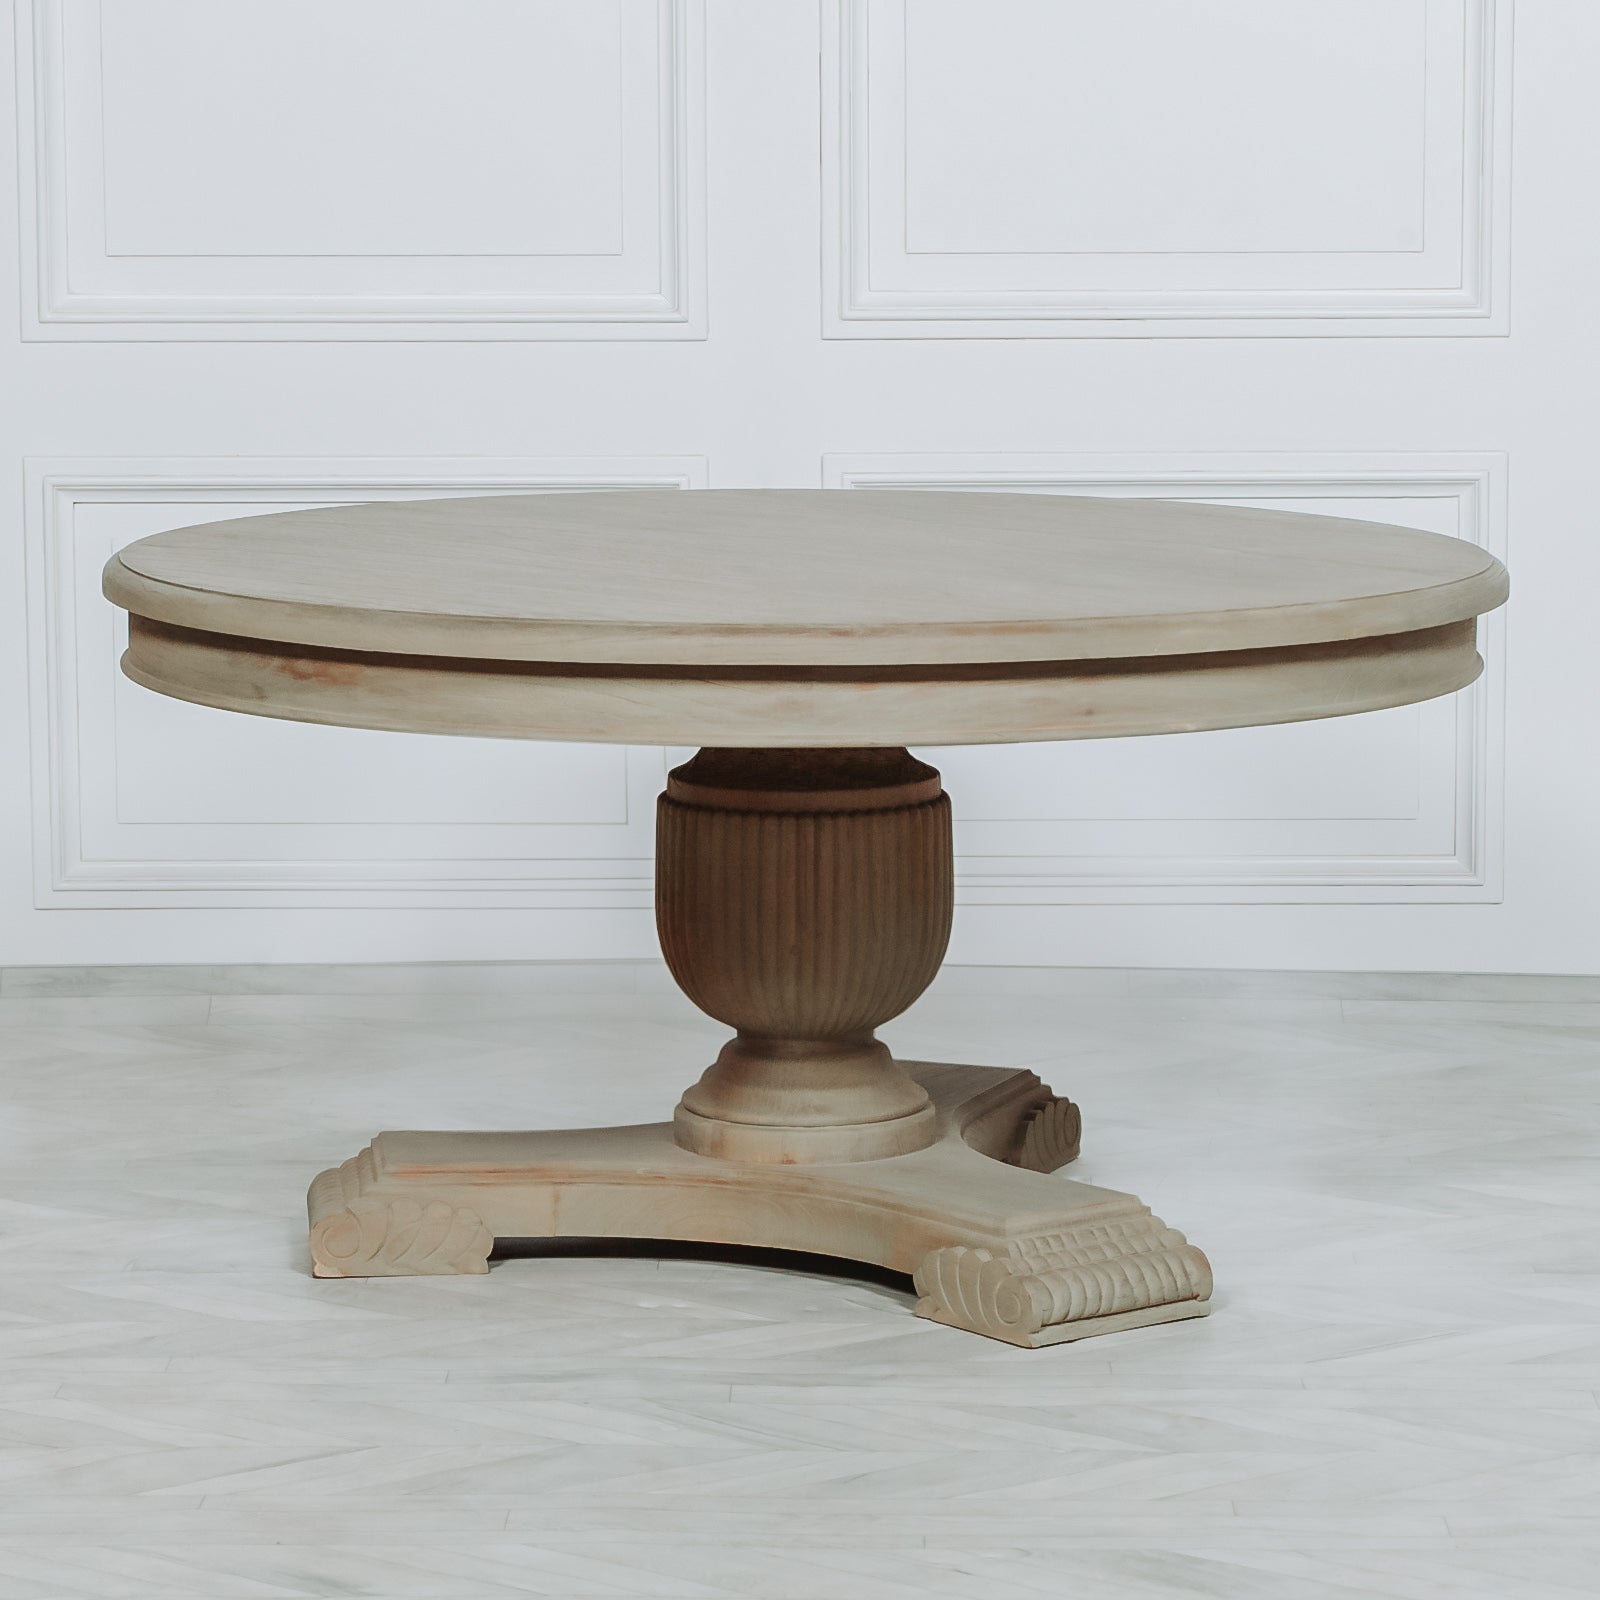 Outland White Cedar Round Rustic Low Dining Table